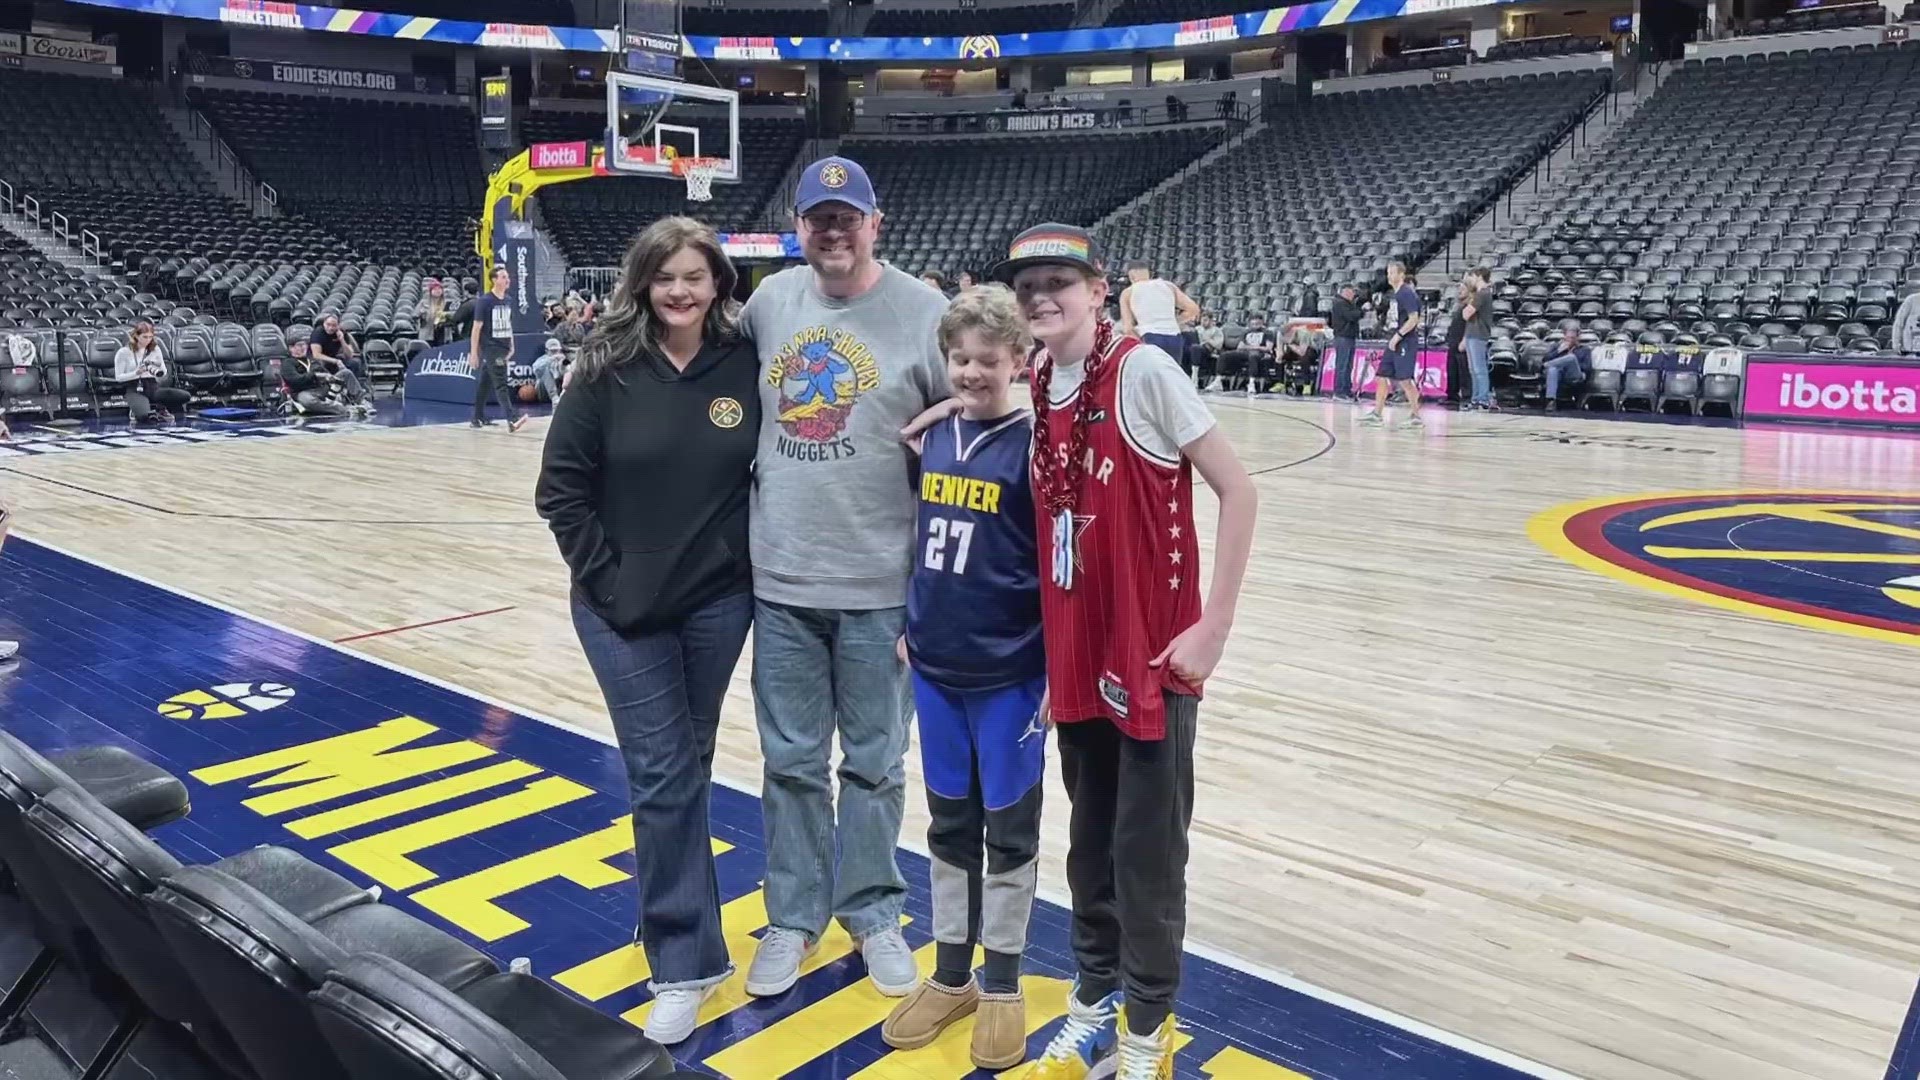 “This is about the best dream ever,” Patrick McCoy said about his huge surprise to watch the Nuggets warm-up and attend the NBA All-Star weekend.